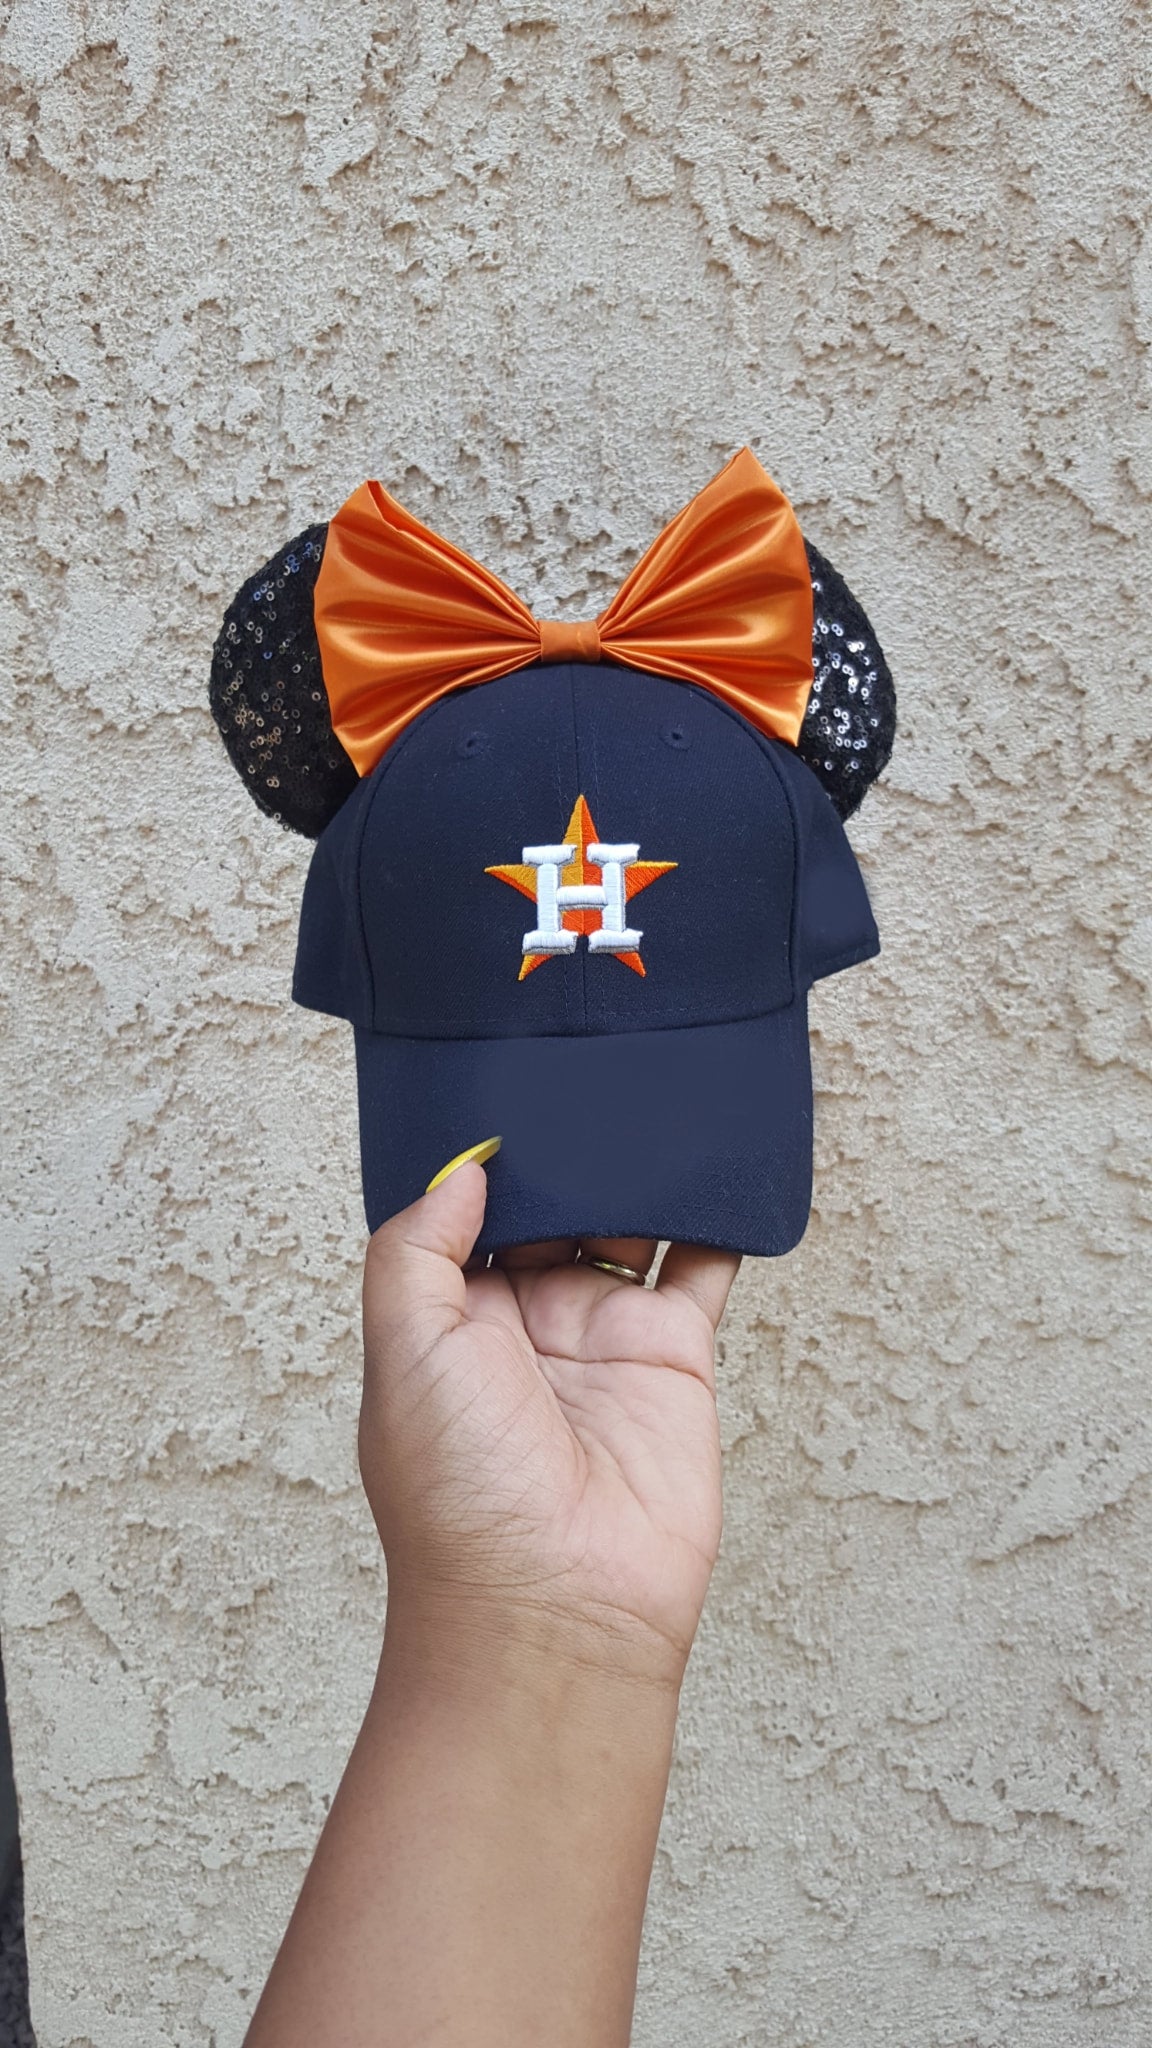 The Astros Cap That Never Was